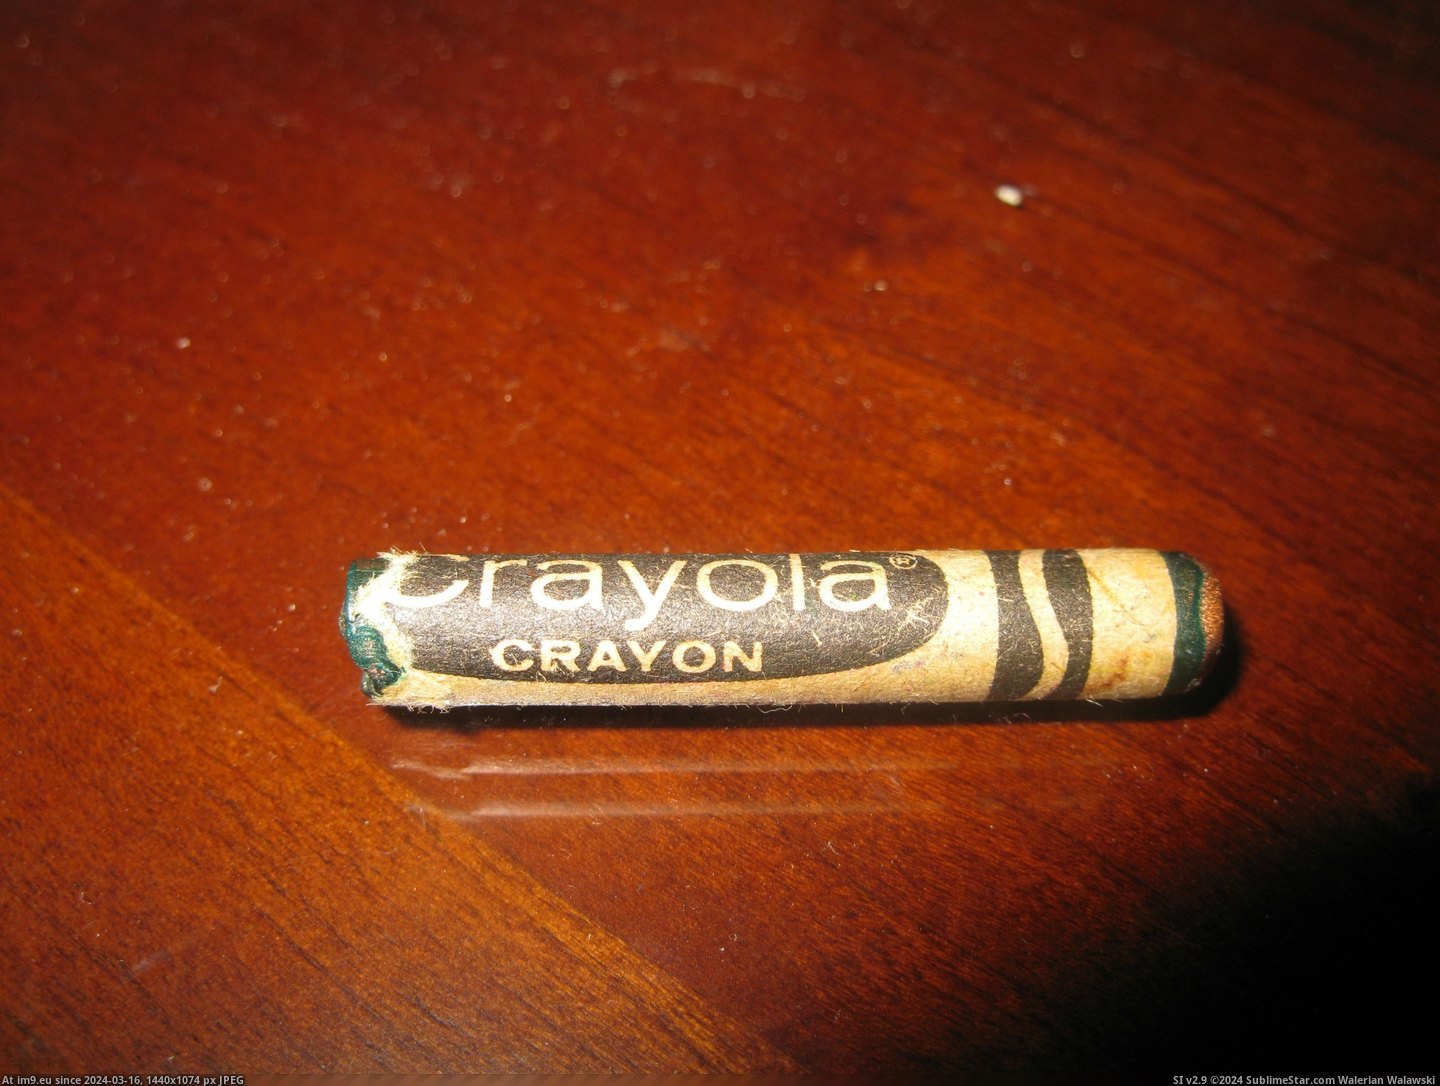 #Old #Can #Green #Copper #Tarnish #Turn #Colored #Crayons [Mildlyinteresting] Copper-colored crayons can actually tarnish and turn green if they're old enough 4 Pic. (Bild von album My r/MILDLYINTERESTING favs))